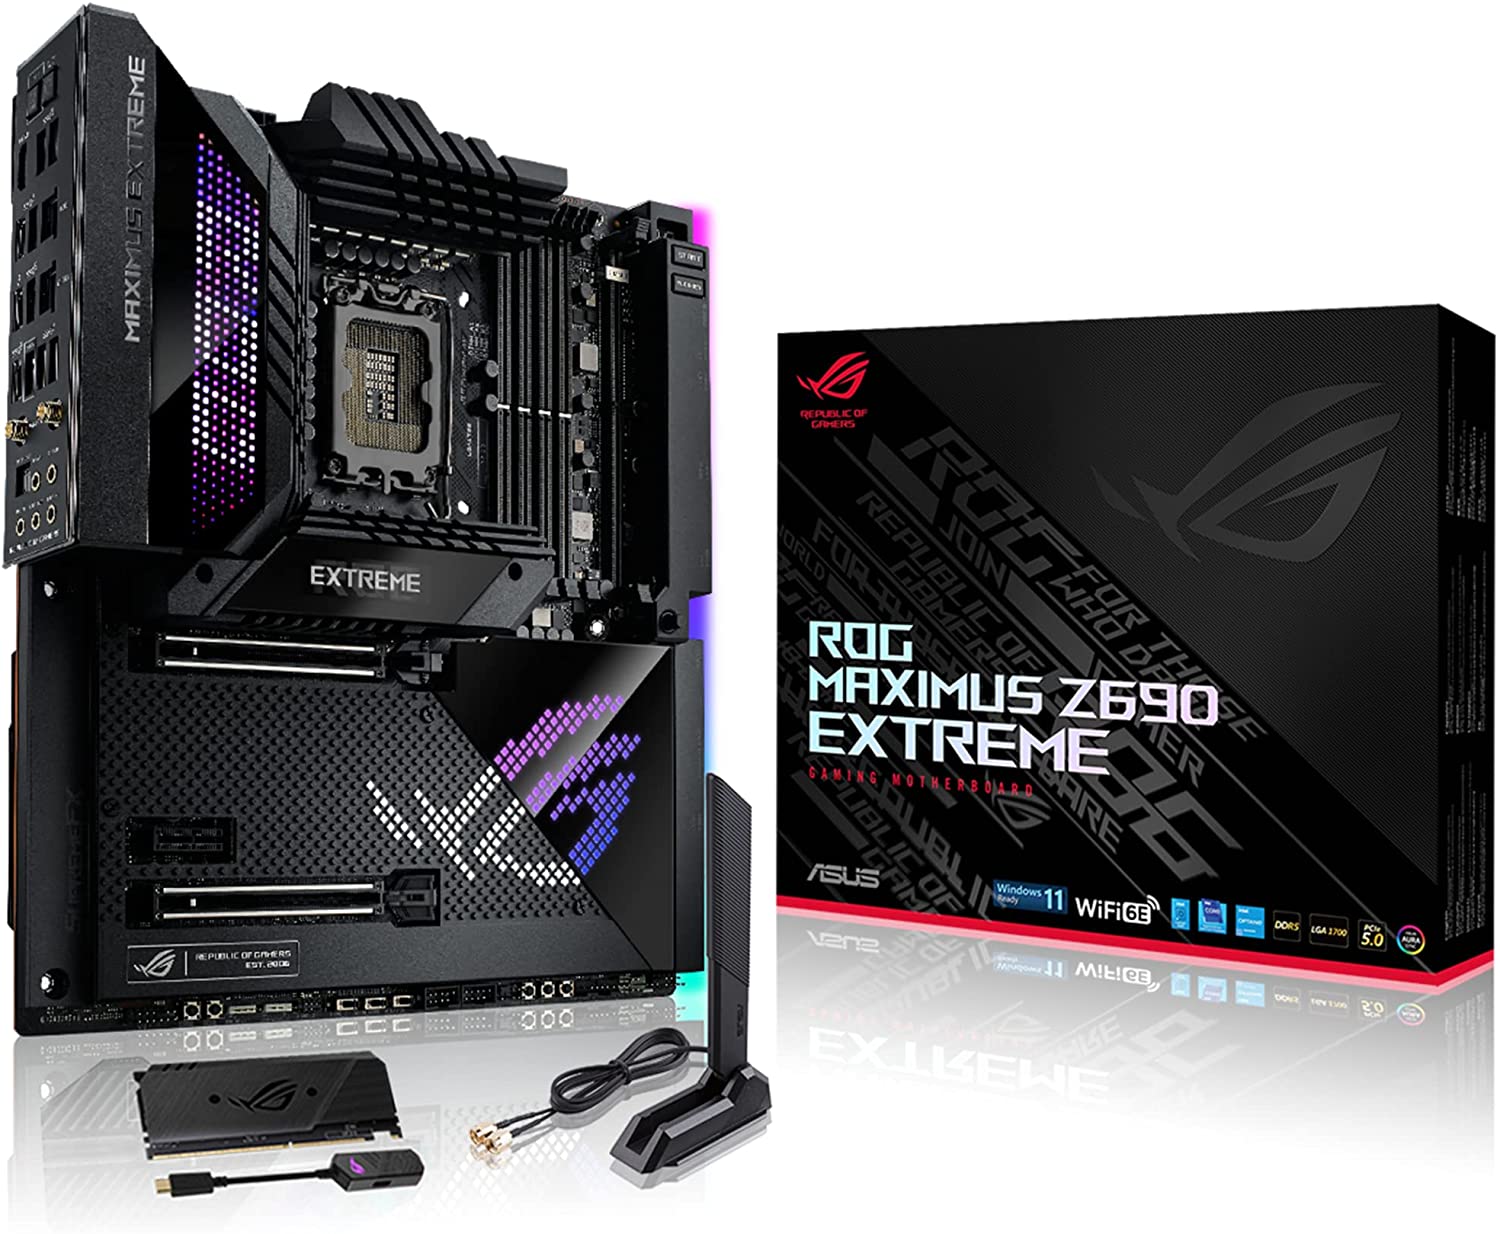 Asus Z690 Extreme